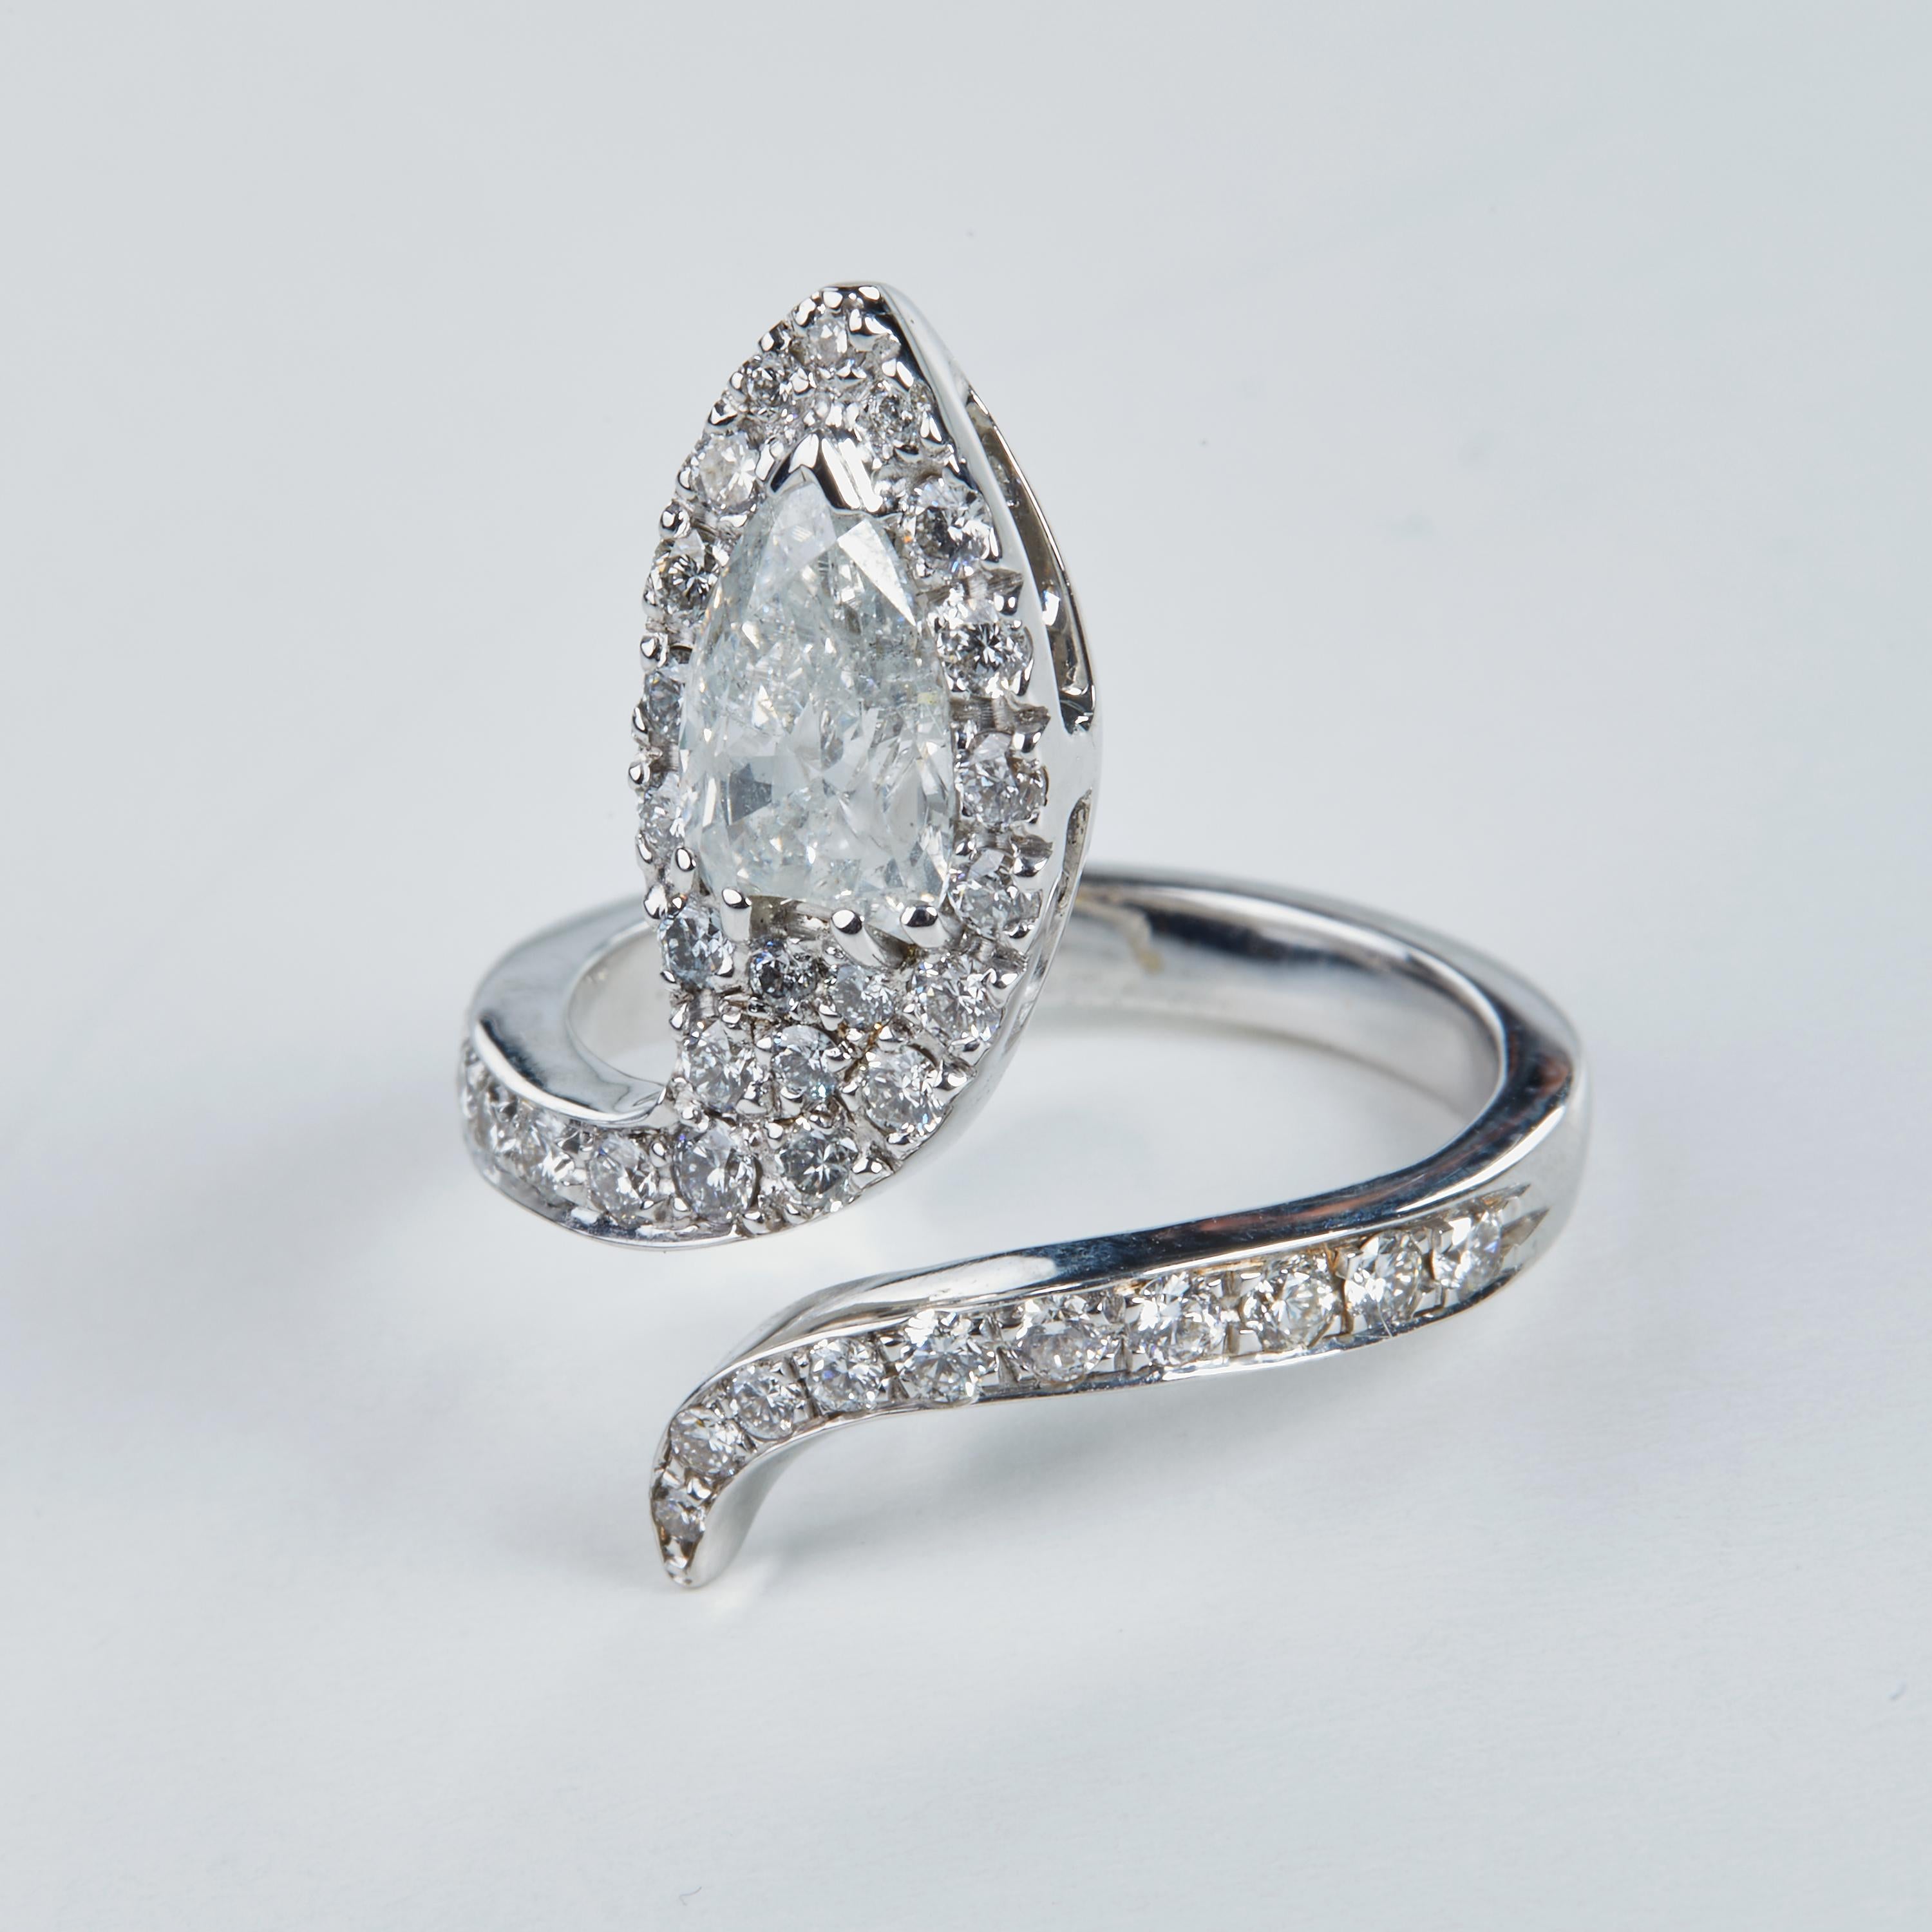 18 Karat White Gold Diamond  Ring

37 Diam. 0.75 carat
1 Diamant  Pear 1.09 H-SI carat



Size EU 52 US 6.1


Founded in 1974, Gianni Lazzaro is a family-owned jewelery company based out of Düsseldorf, Germany.
Although rooted in Germany, Gianni